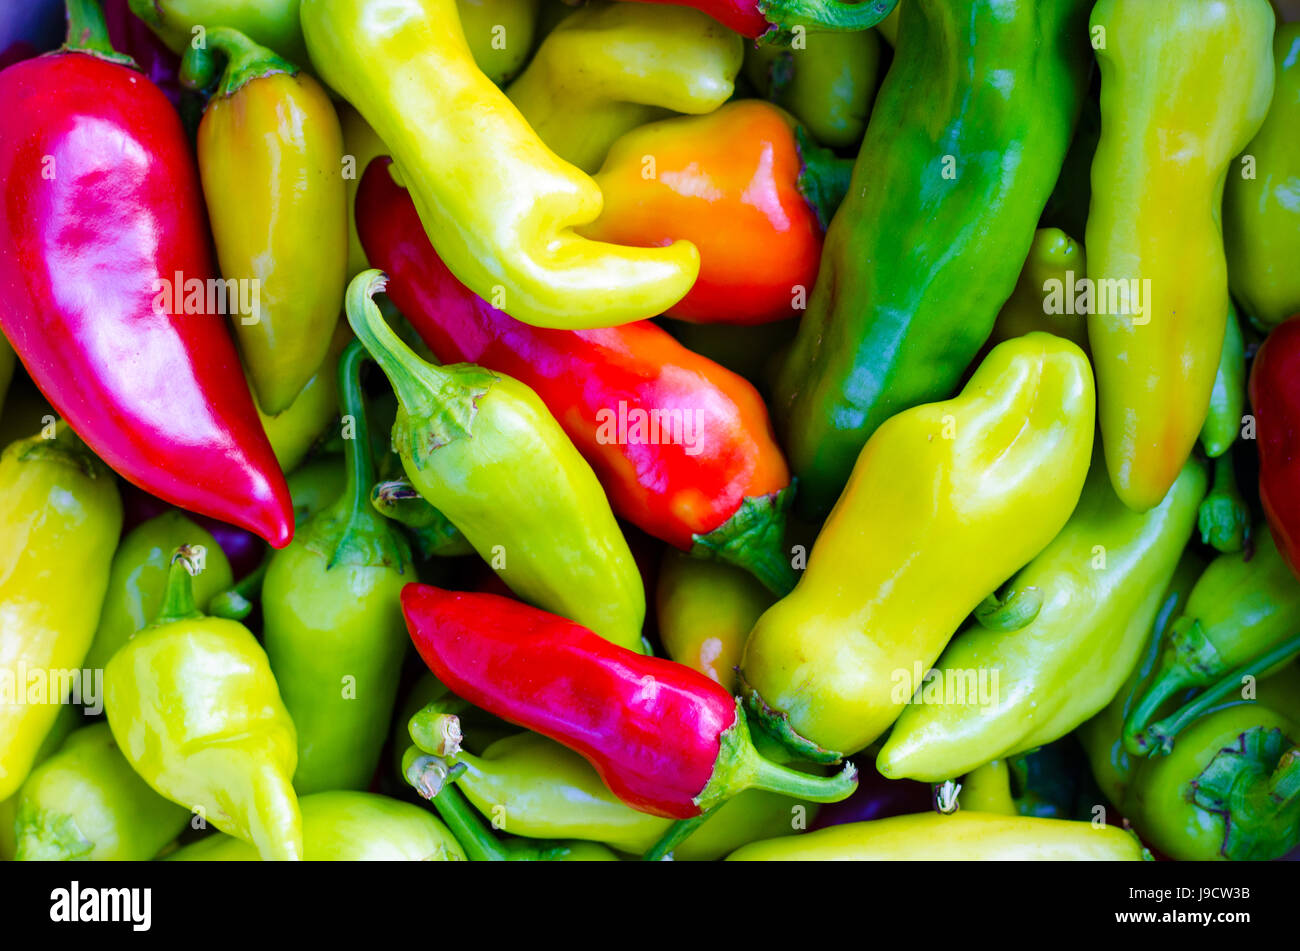 Yellow, green and red colorful bell peppers, natural background Stock Photo